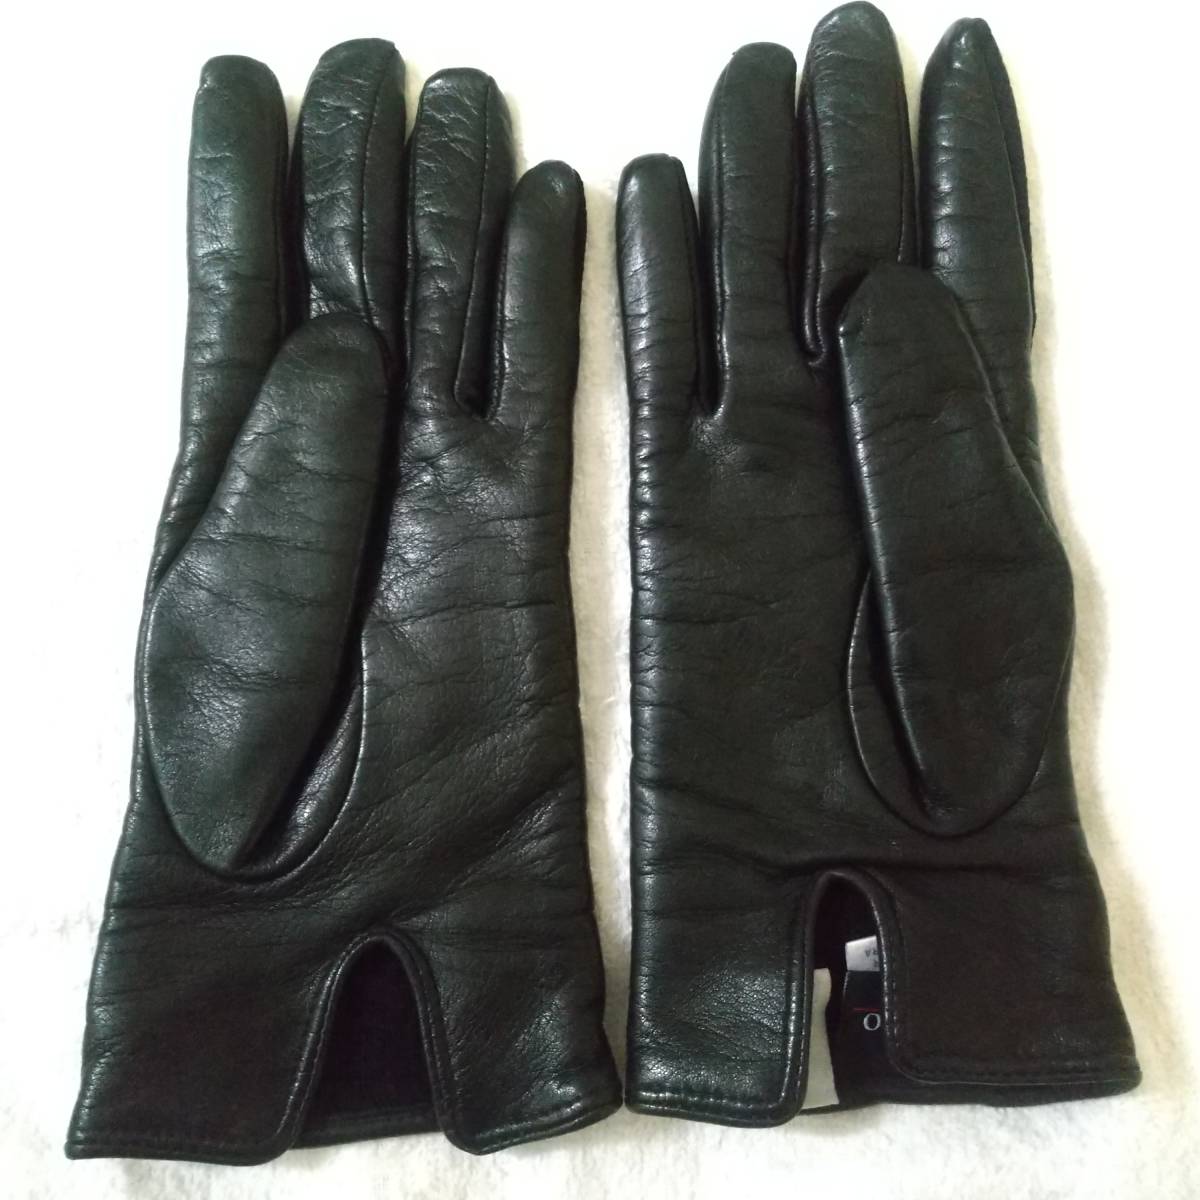 Boerio Italy made leather gloves 6 1/2